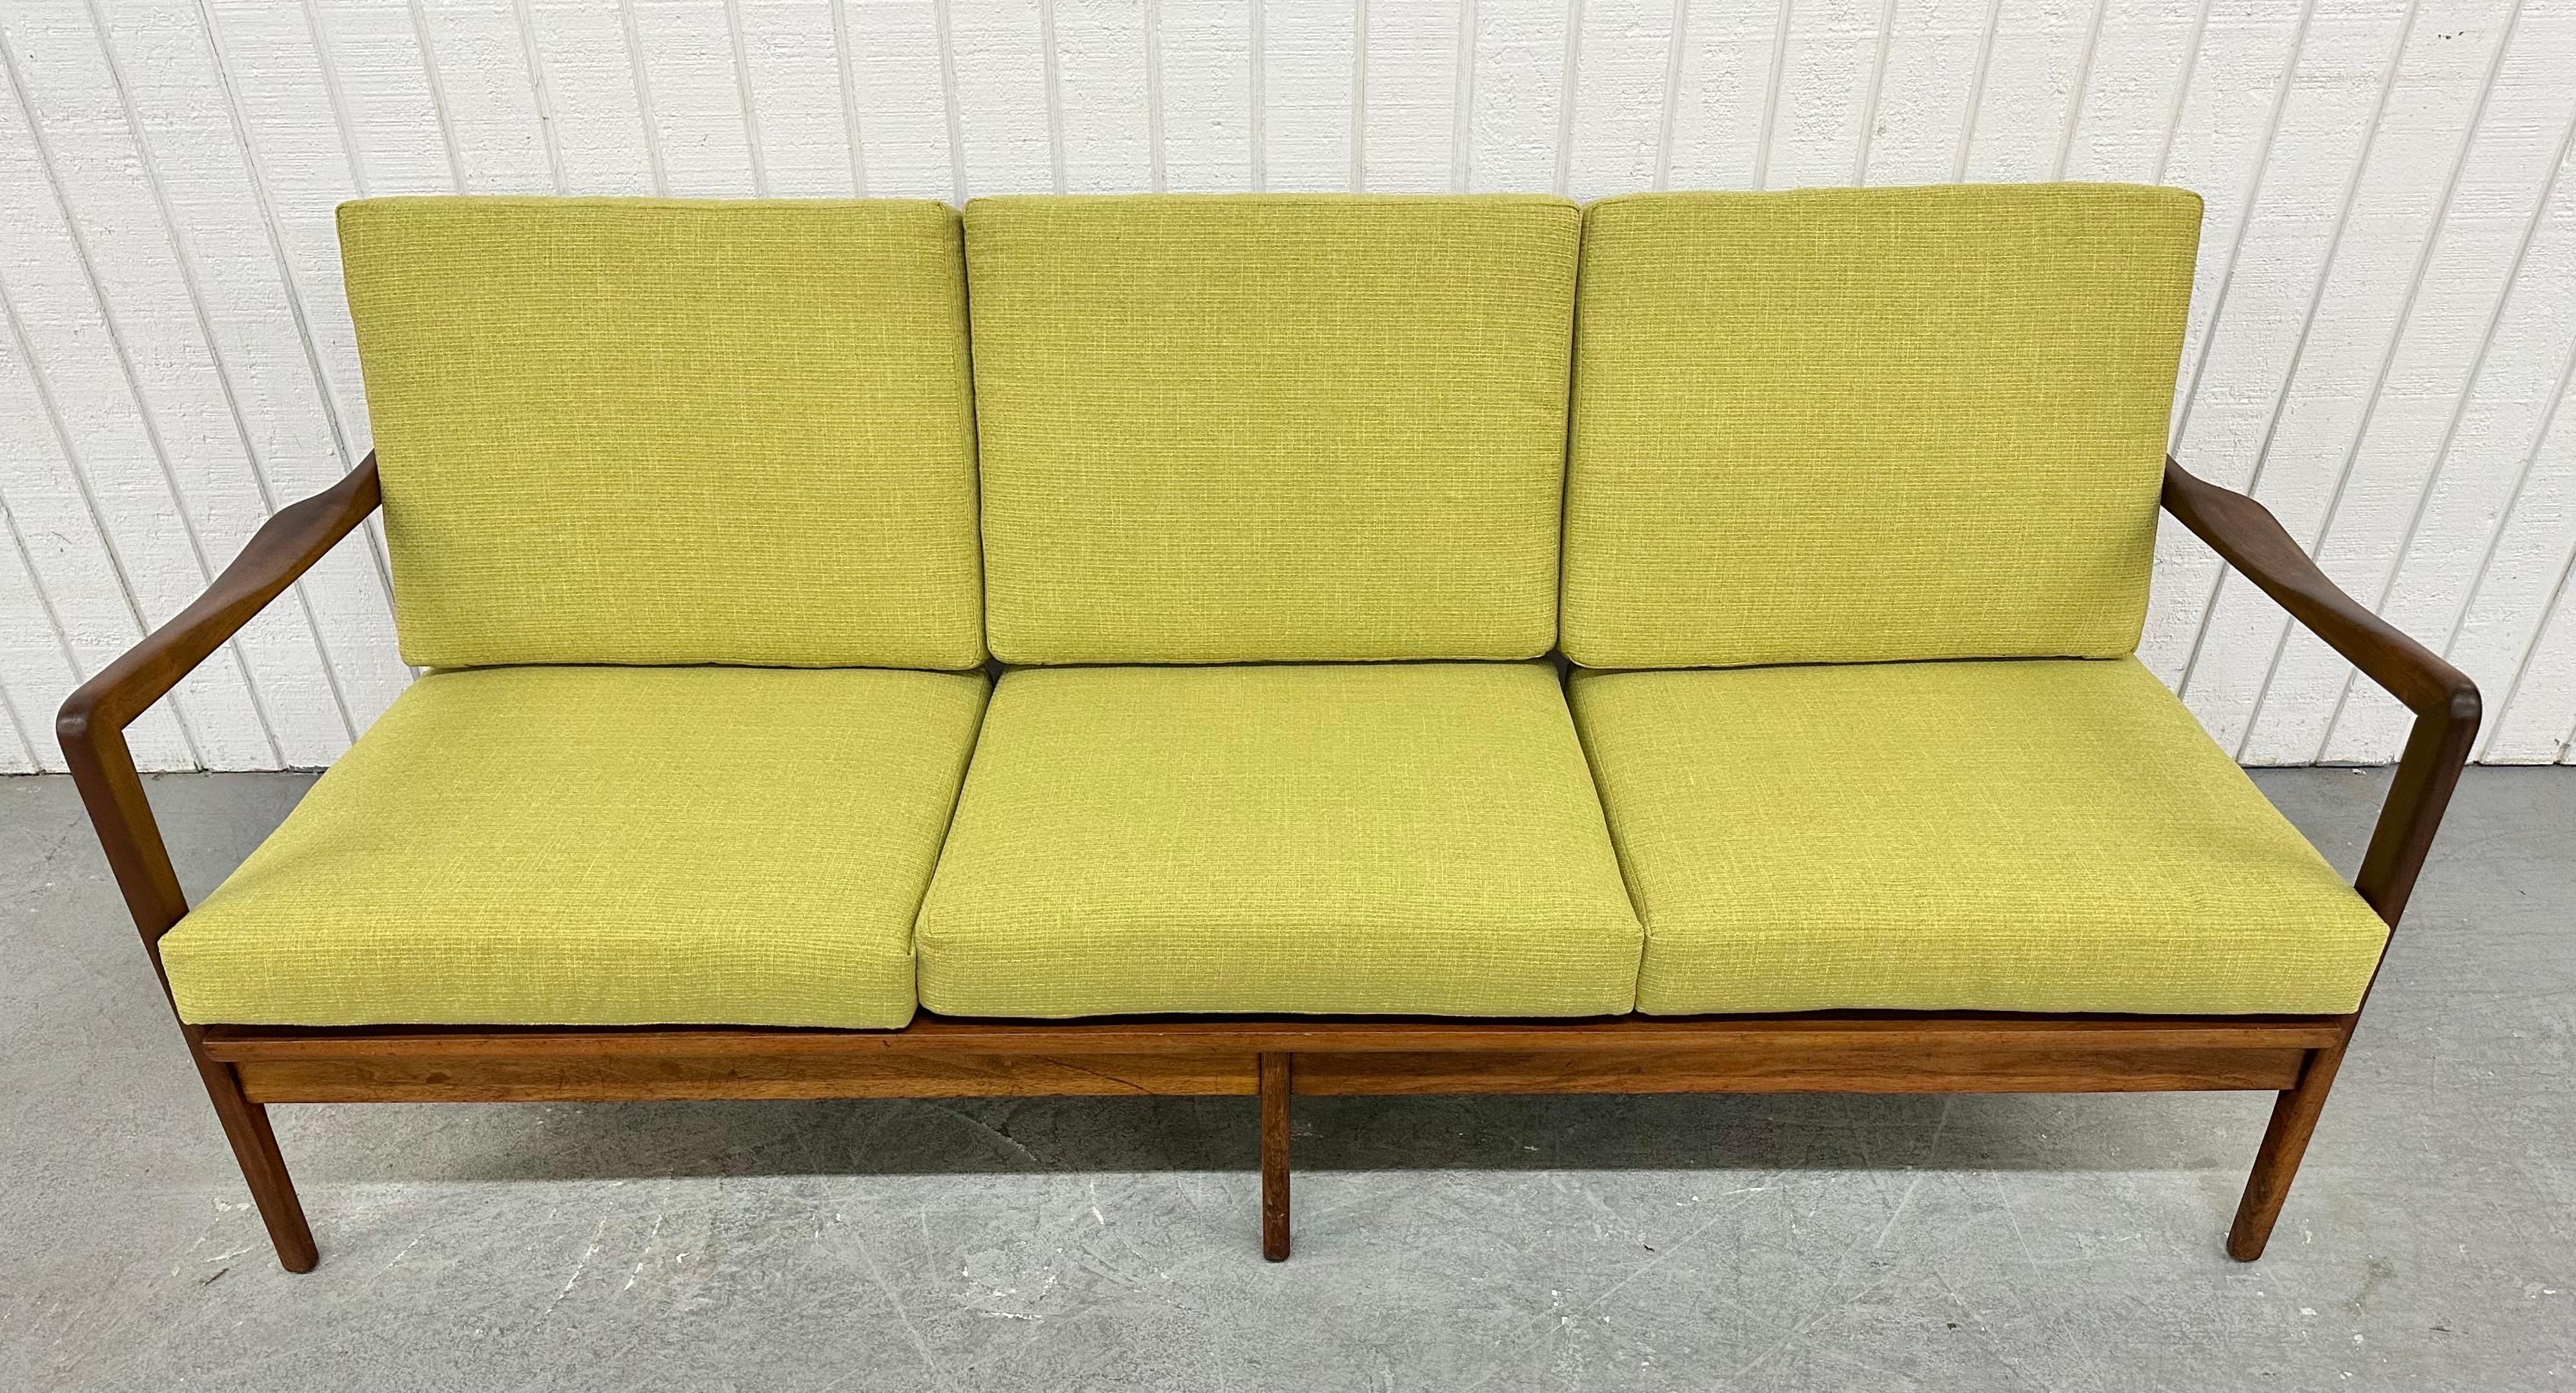 This listing is for a Mid-Century Modern Walnut Sofa. Featuring a thick walnut frame, arms on each side, wooden back spindles, modern legs, new cushions, new straps for support, and a beautiful walnut finish. This is an exceptional combination of